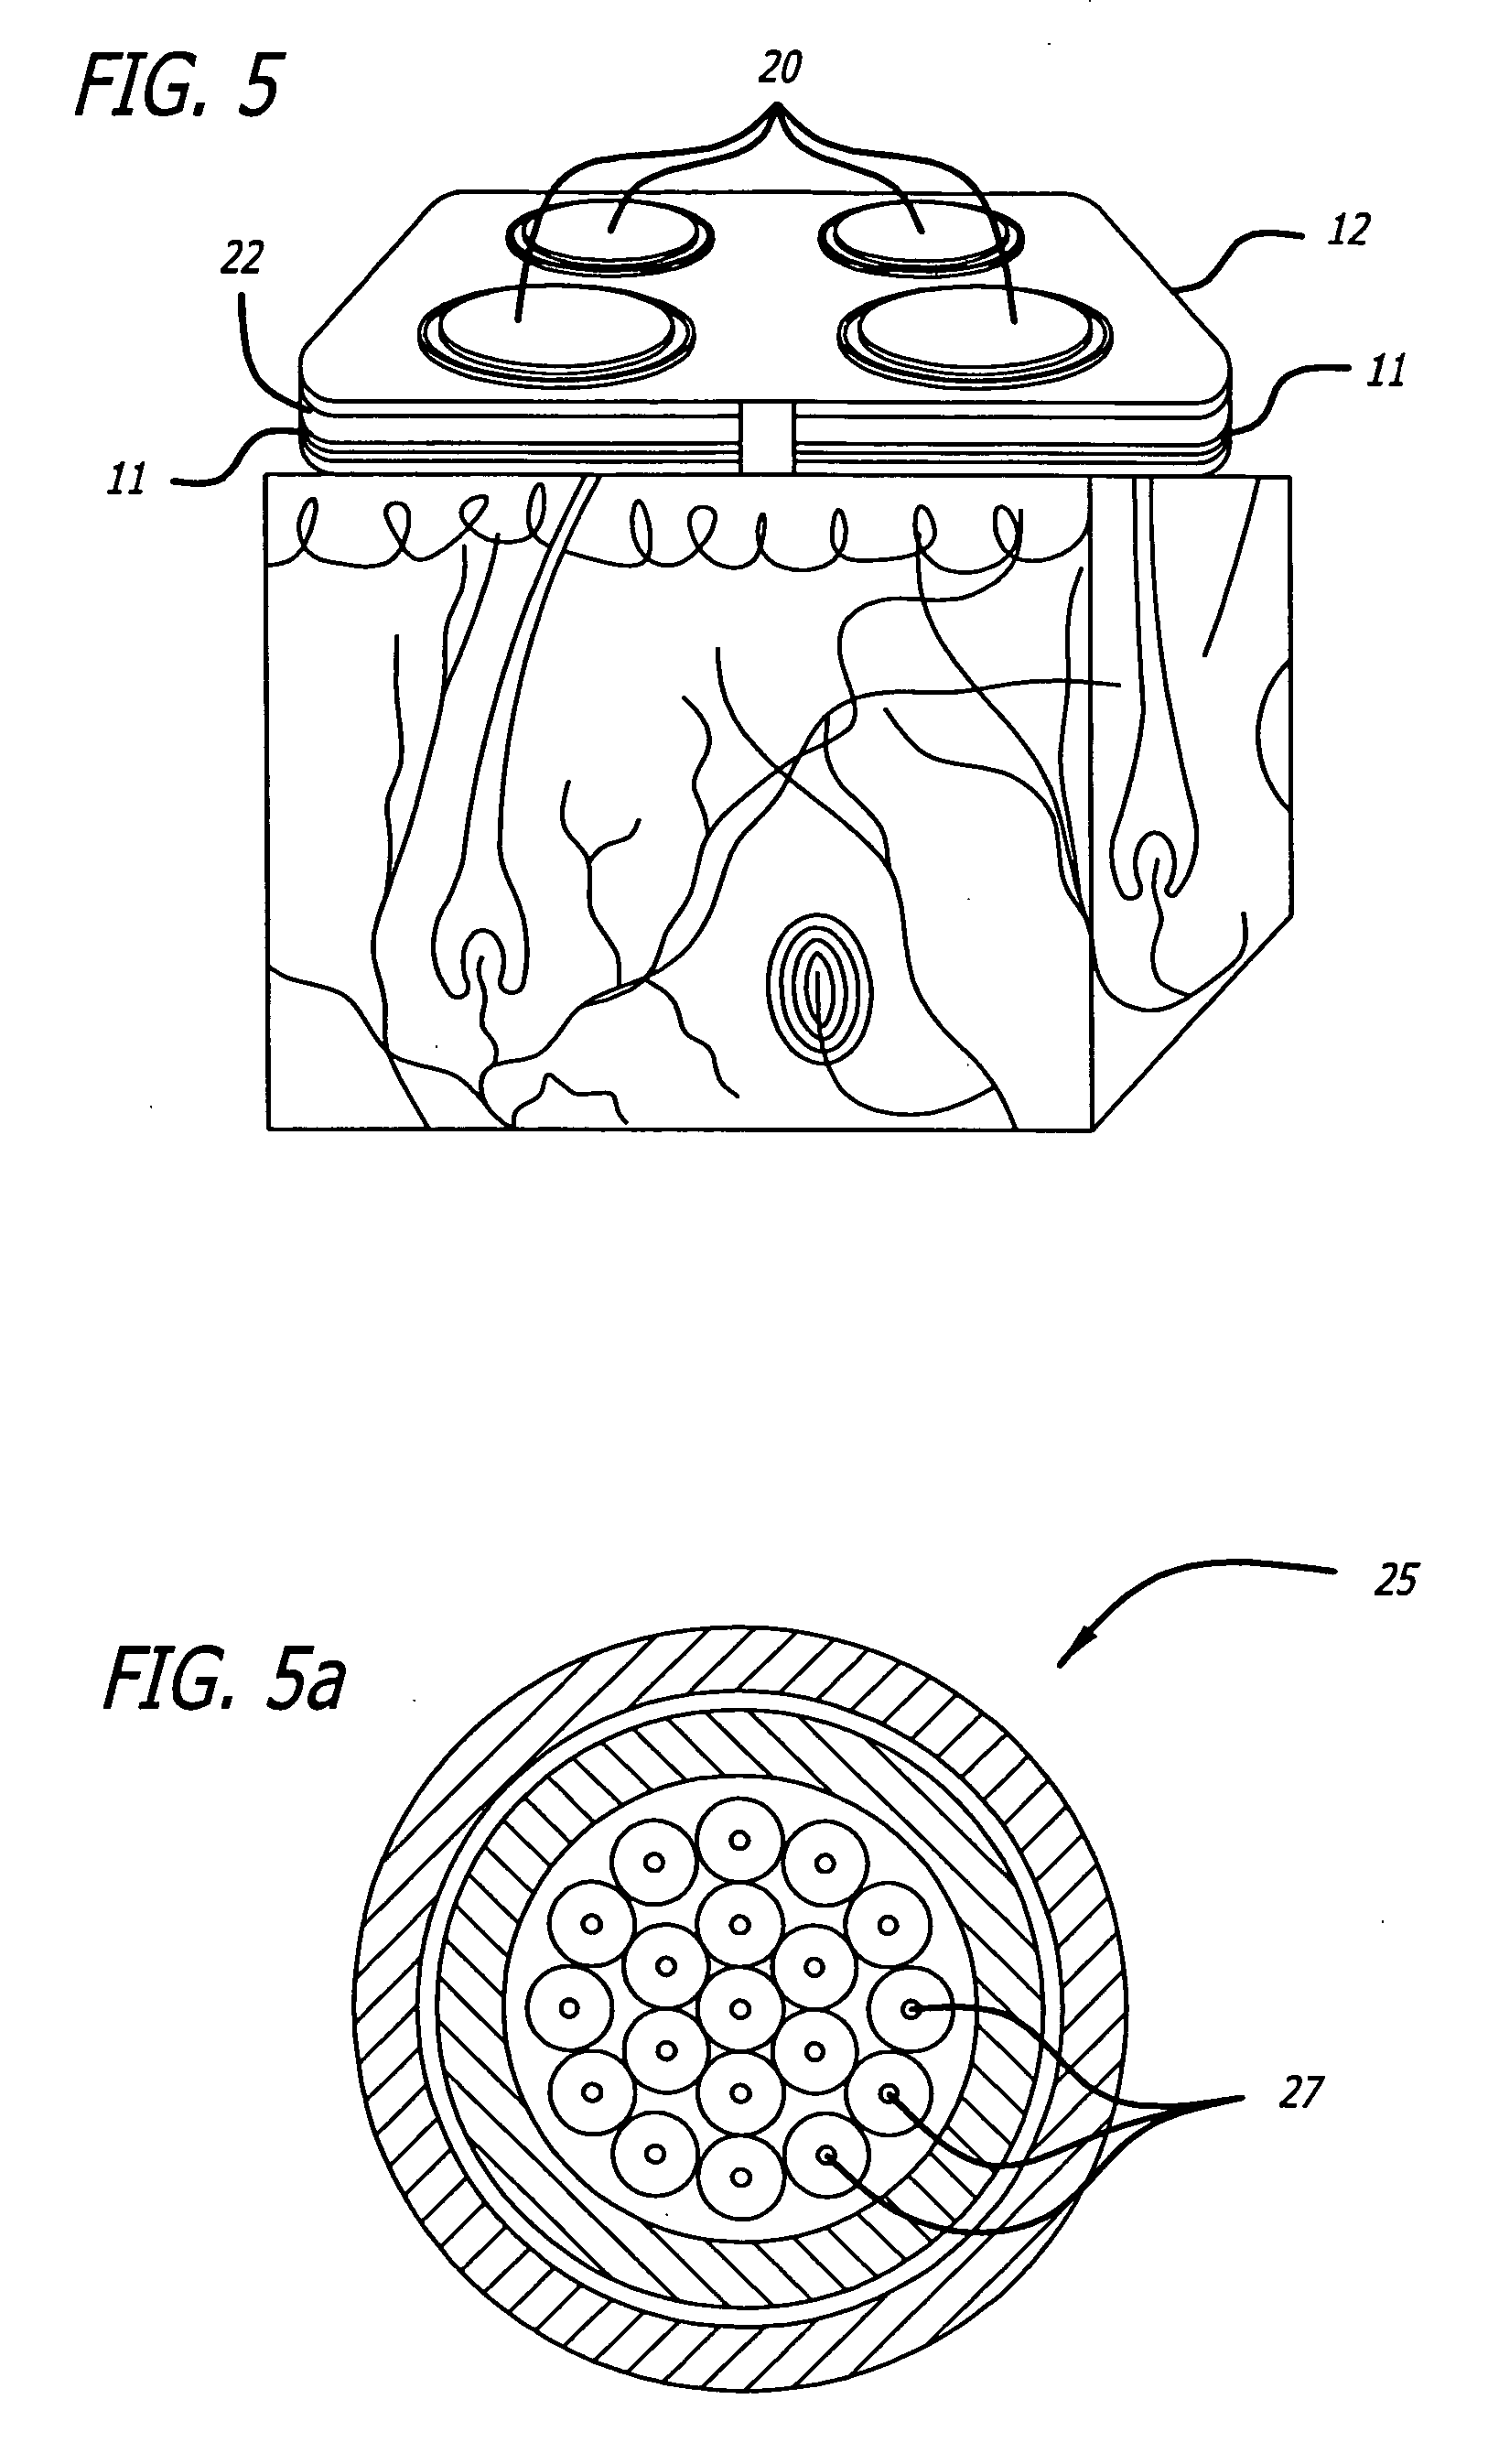 Methods, apparatus and charged chemicals for control of ions, molecules or electrons